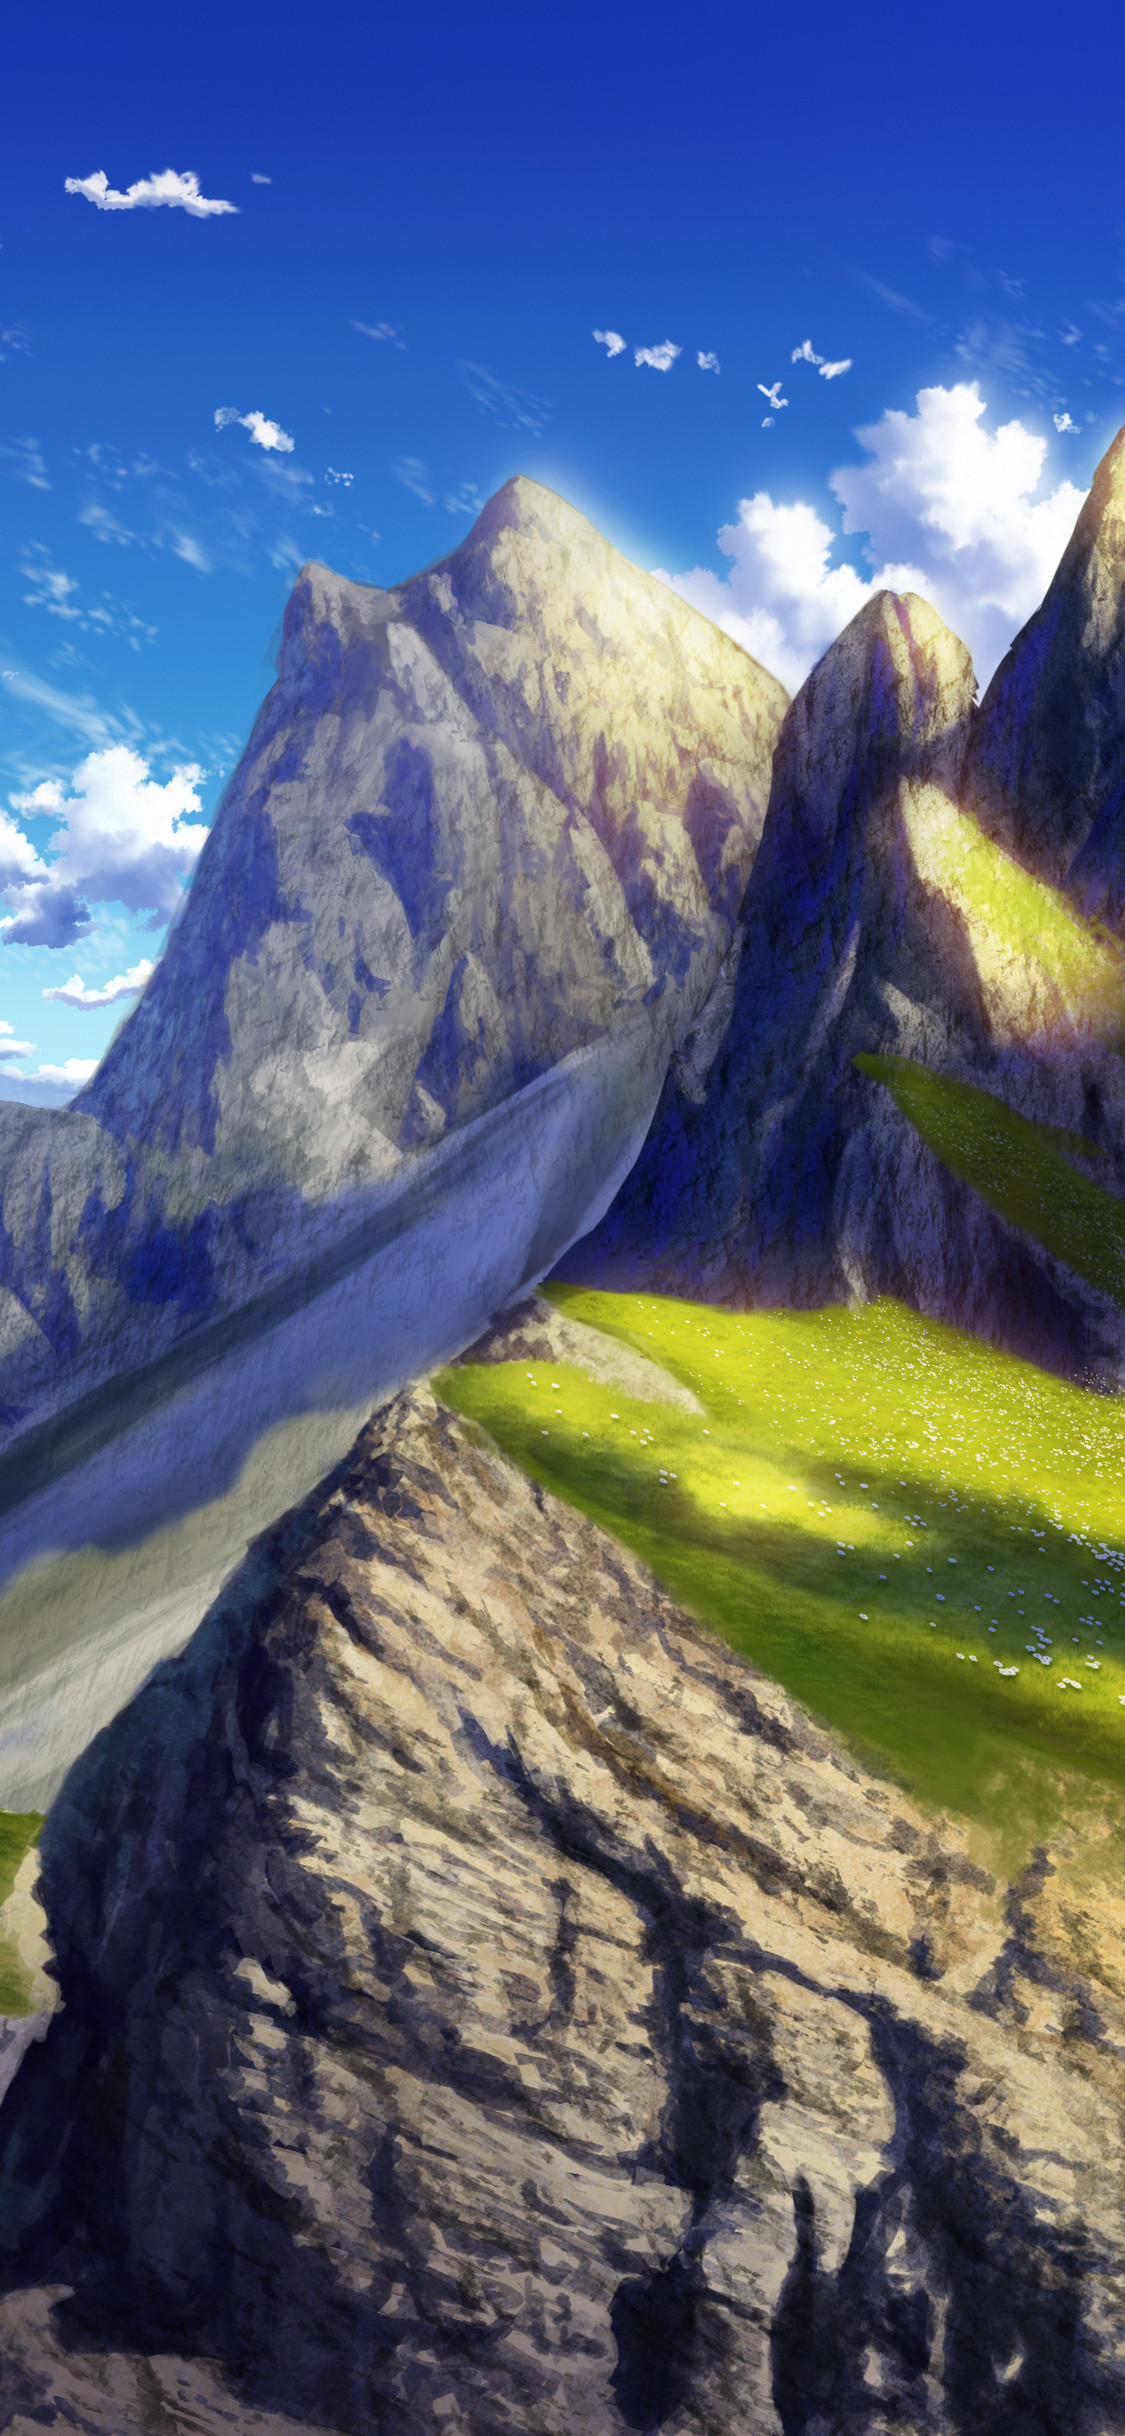 A digital painting of a grassy mountain valley with a large mountain in the background. - Anime landscape